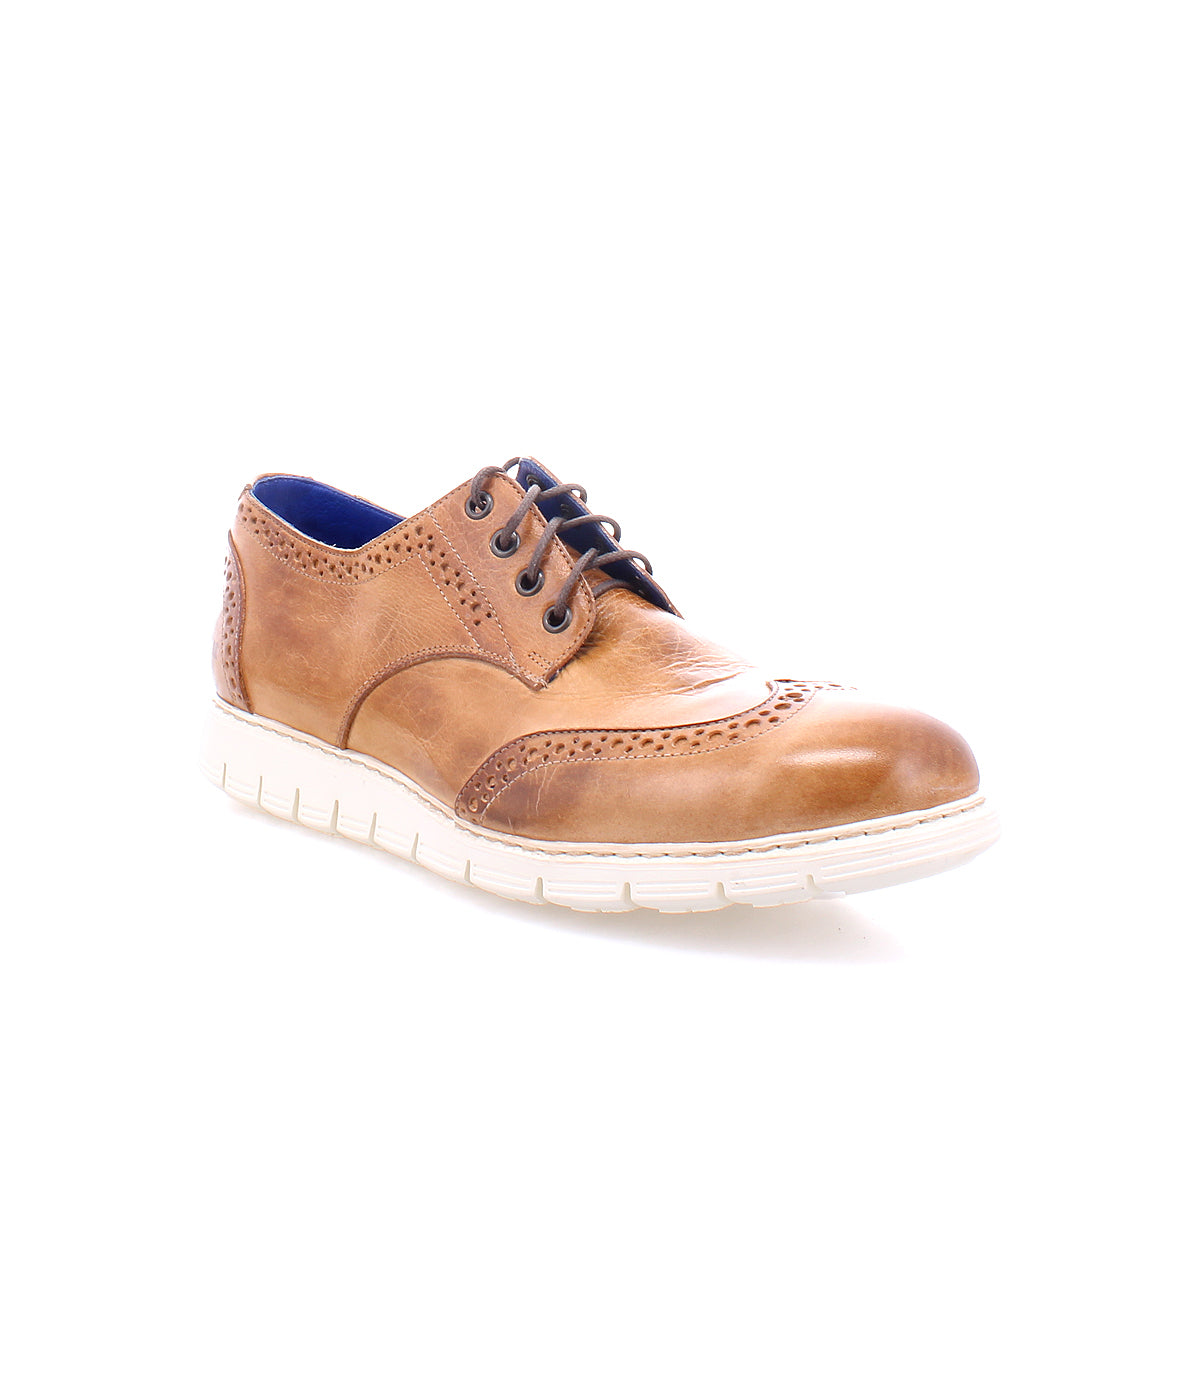 The Bed Stu Cayuga II is a contemporary casual male shoe with a brown lightweight leather upper and a white sole.